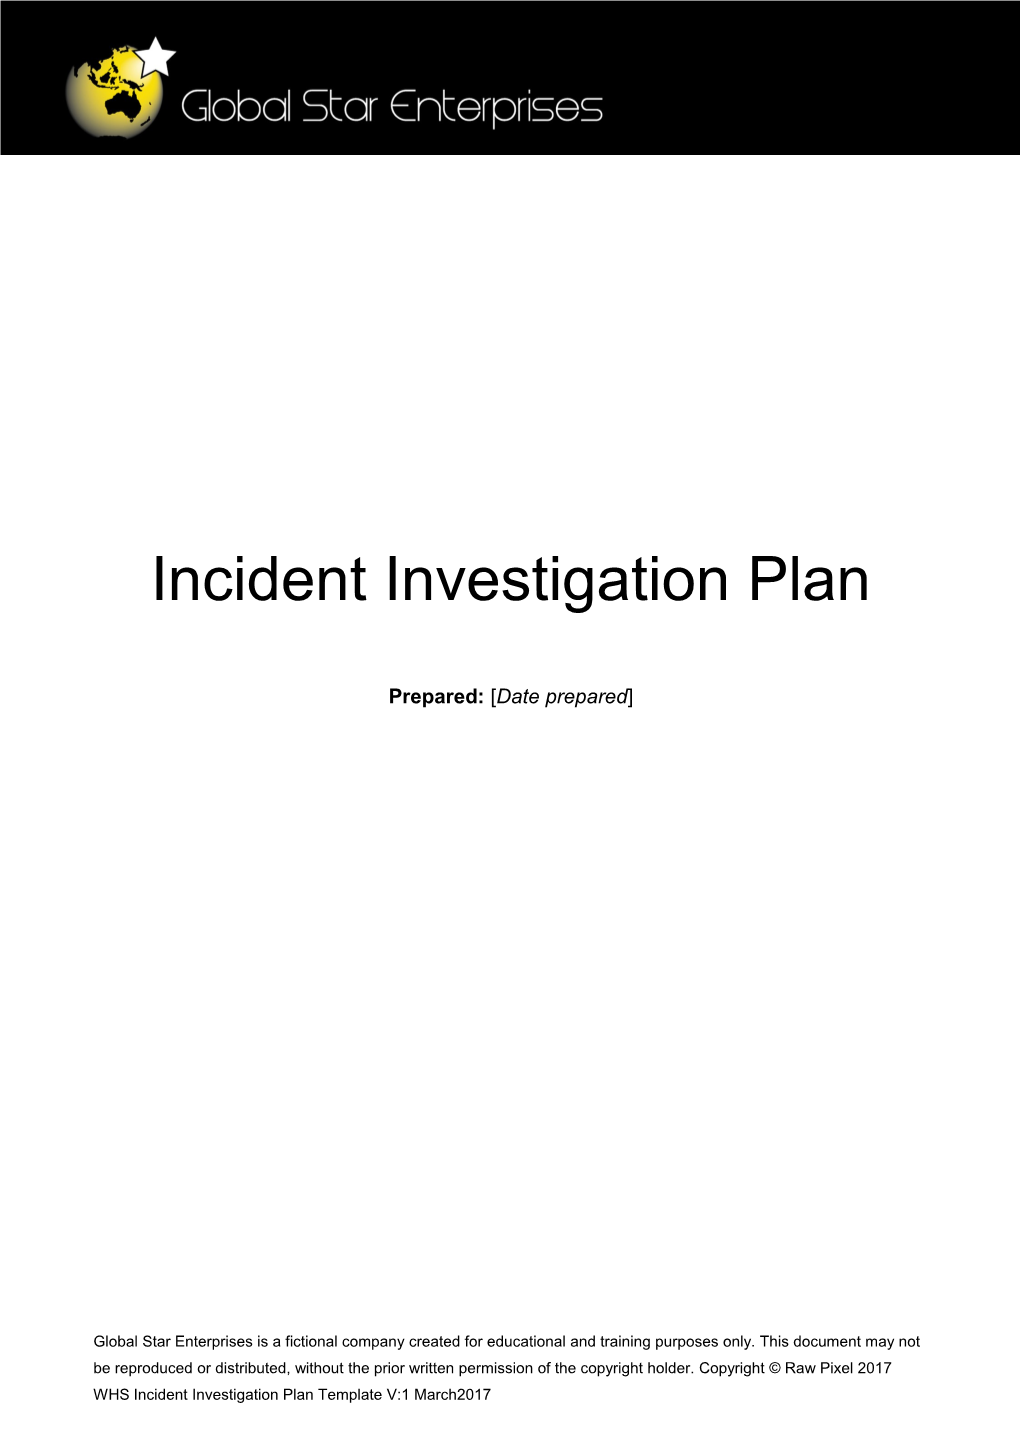 WHS Incident Investigation Plan Template